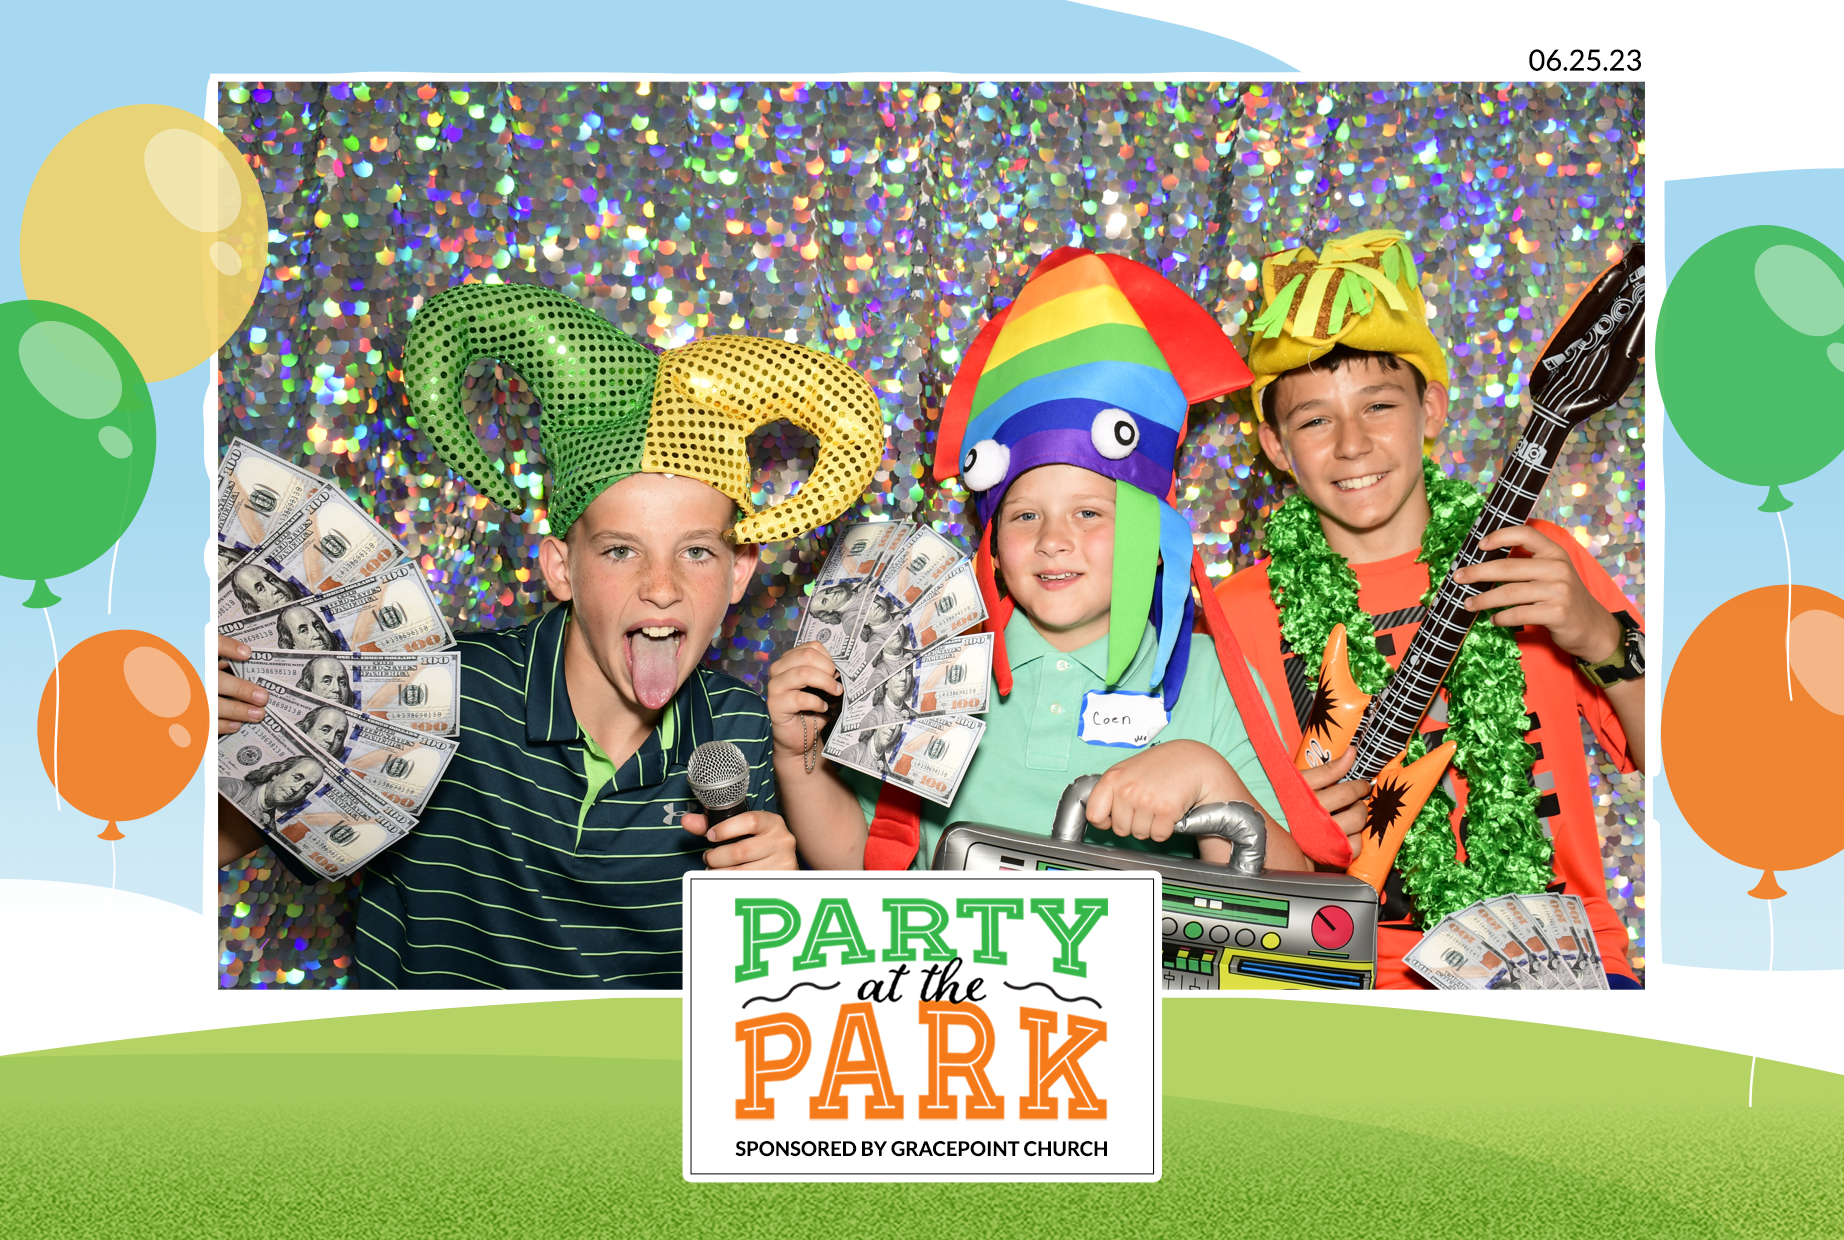 Sample photo from a party at the park